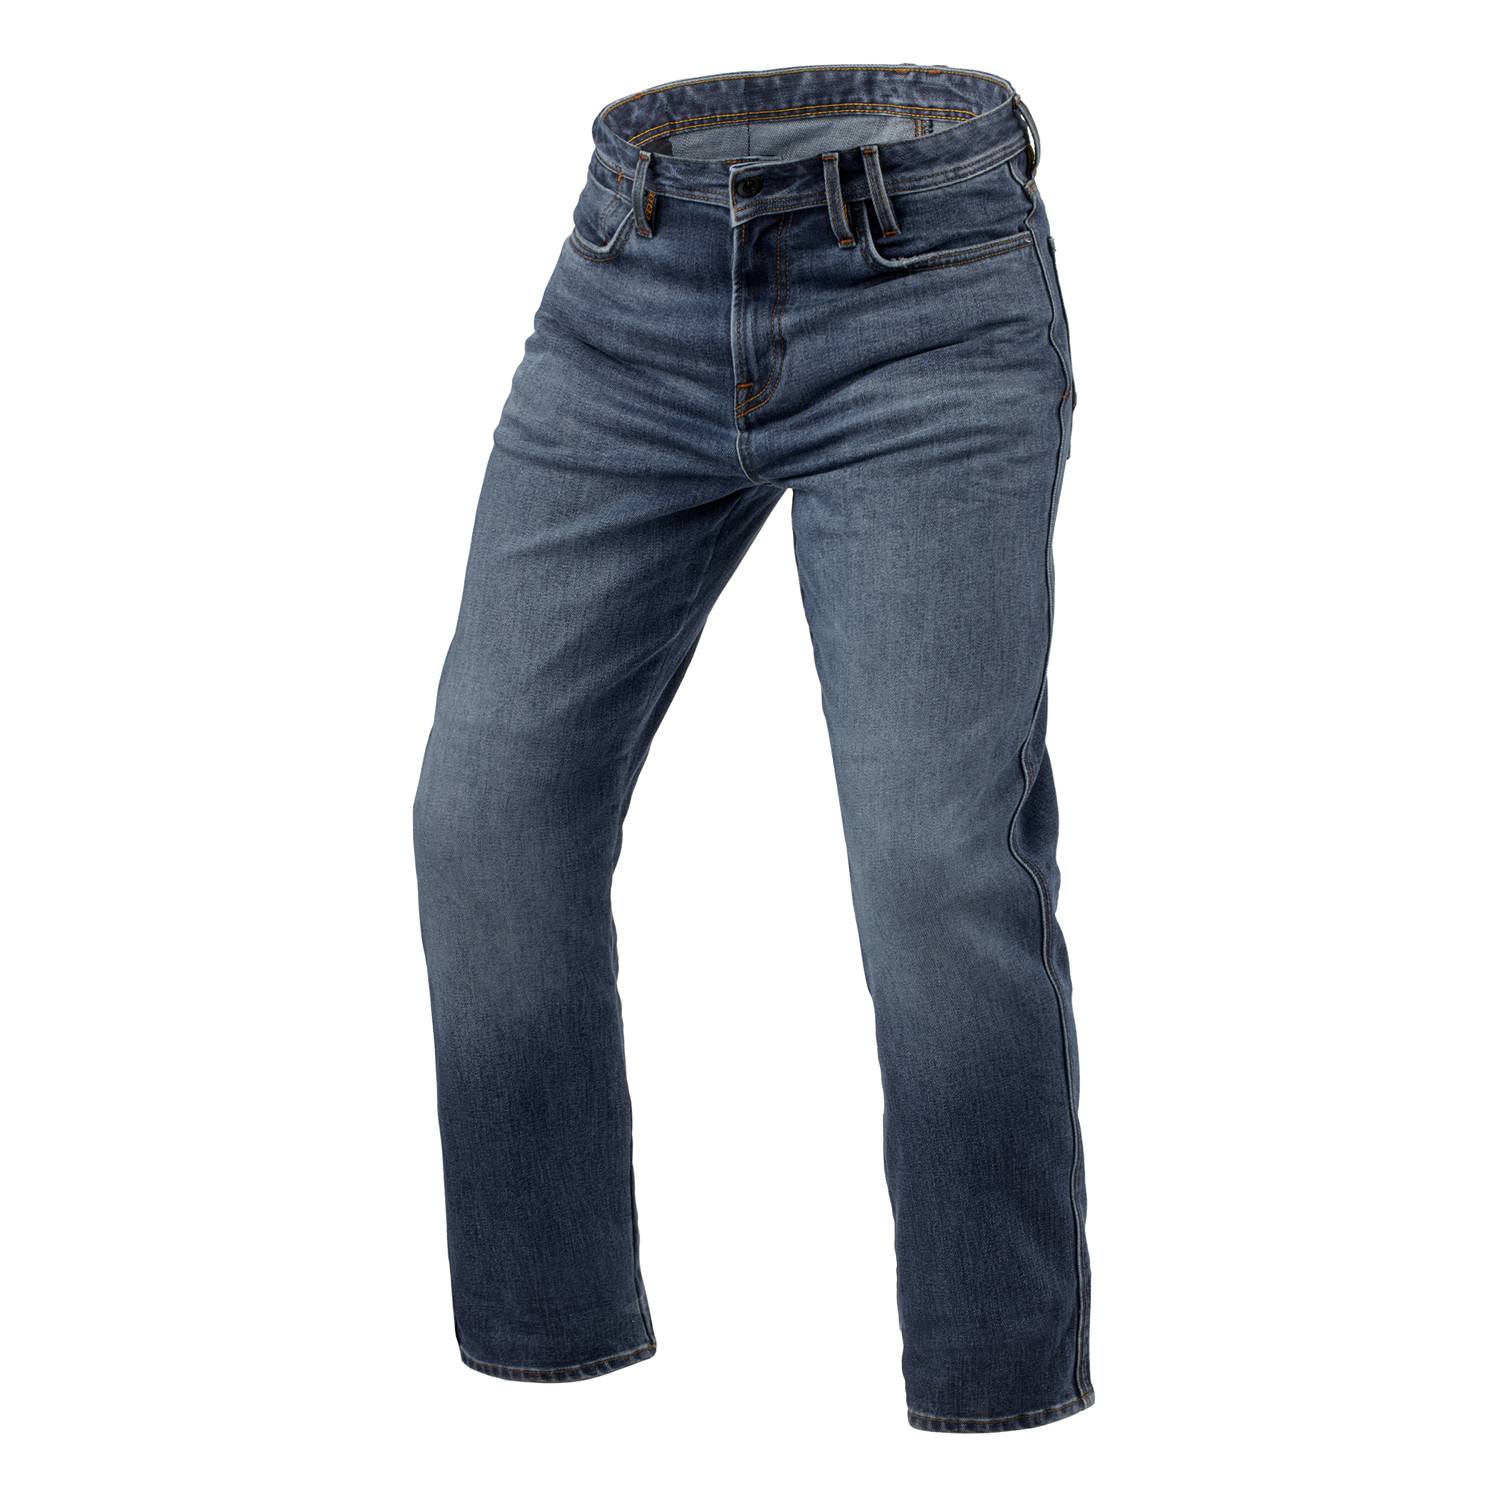 Image of EU REV'IT! Jeans Lombard 3 RF Medium Blue Stone L34 Motorcycle Jeans Taille L34/W32